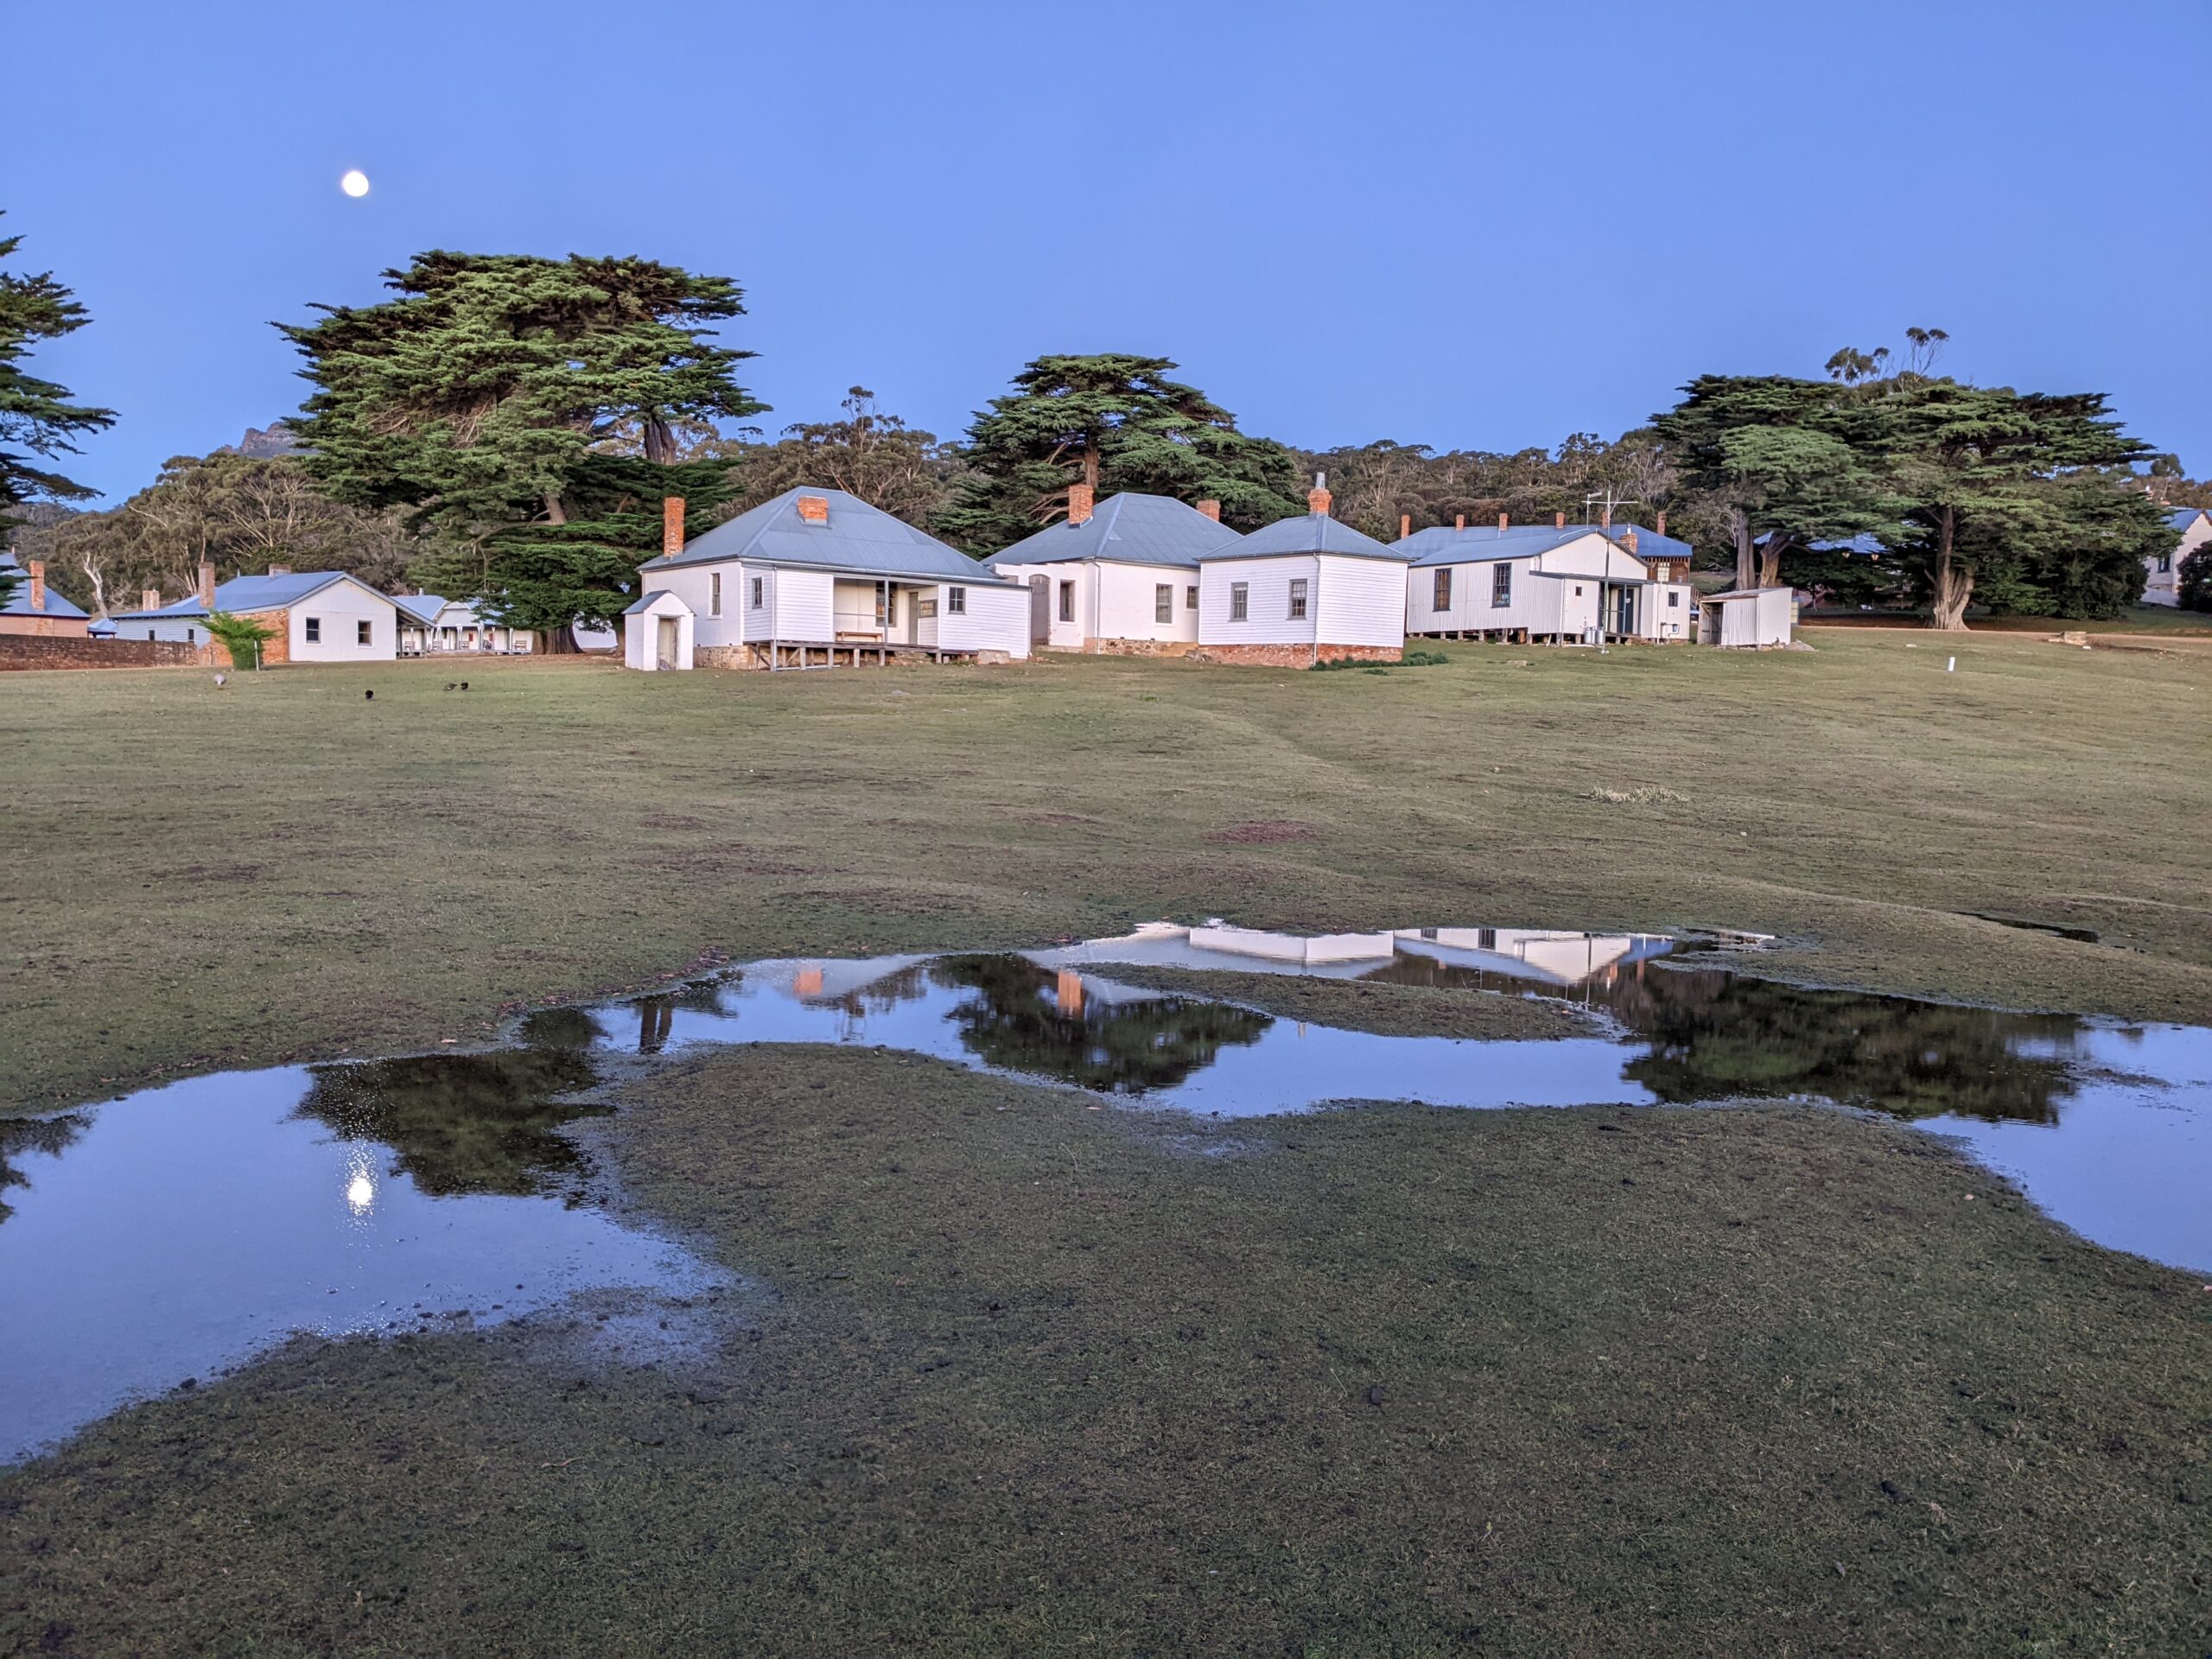 White-washed officer's buildings with a rising moon in the background. Reflections in pools of rainwater in the foreground.er in the foreground.